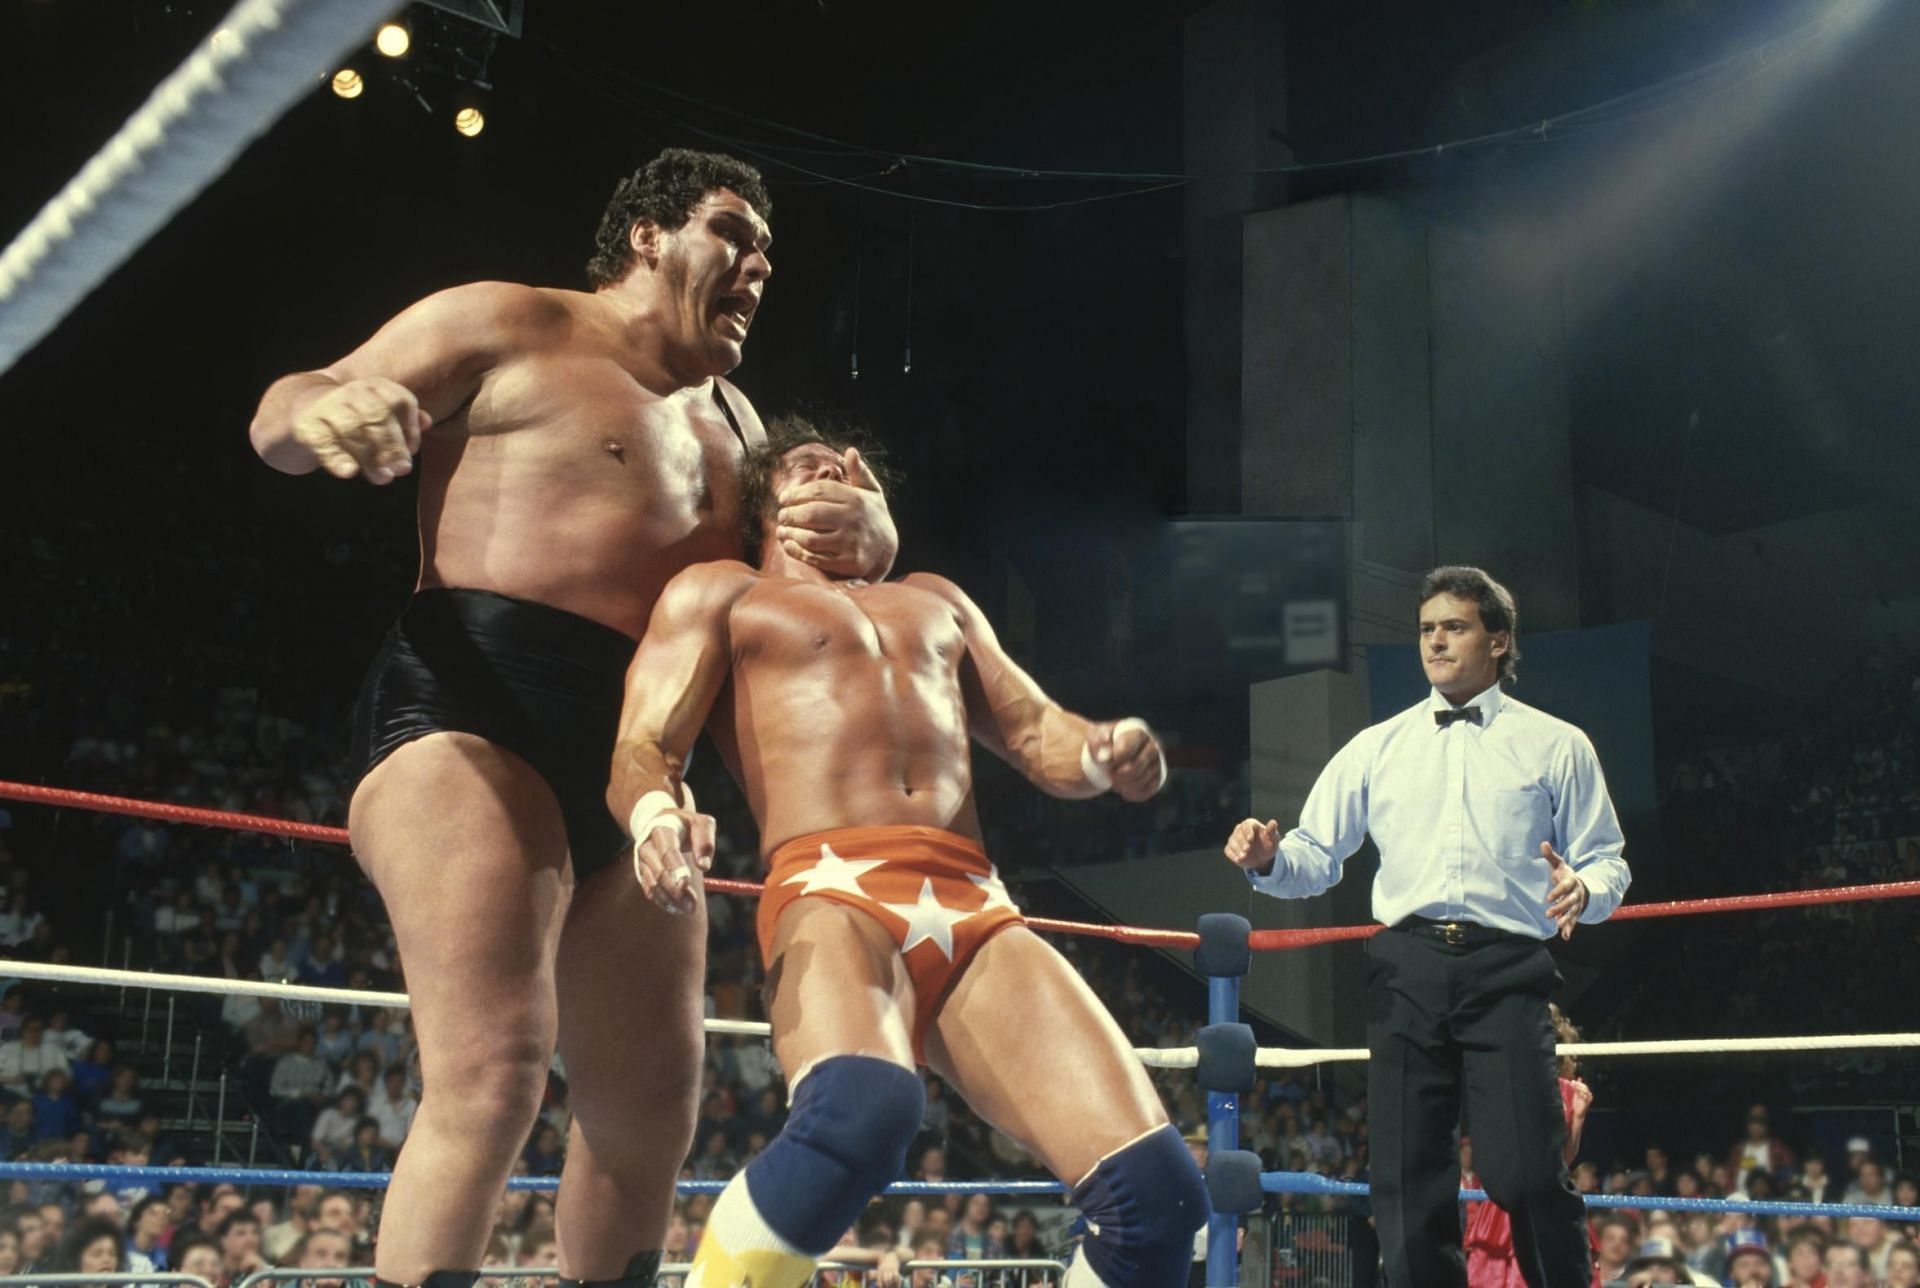 Andre the Giant is said to take &quot;Giant&quot; Bathroom breaks.